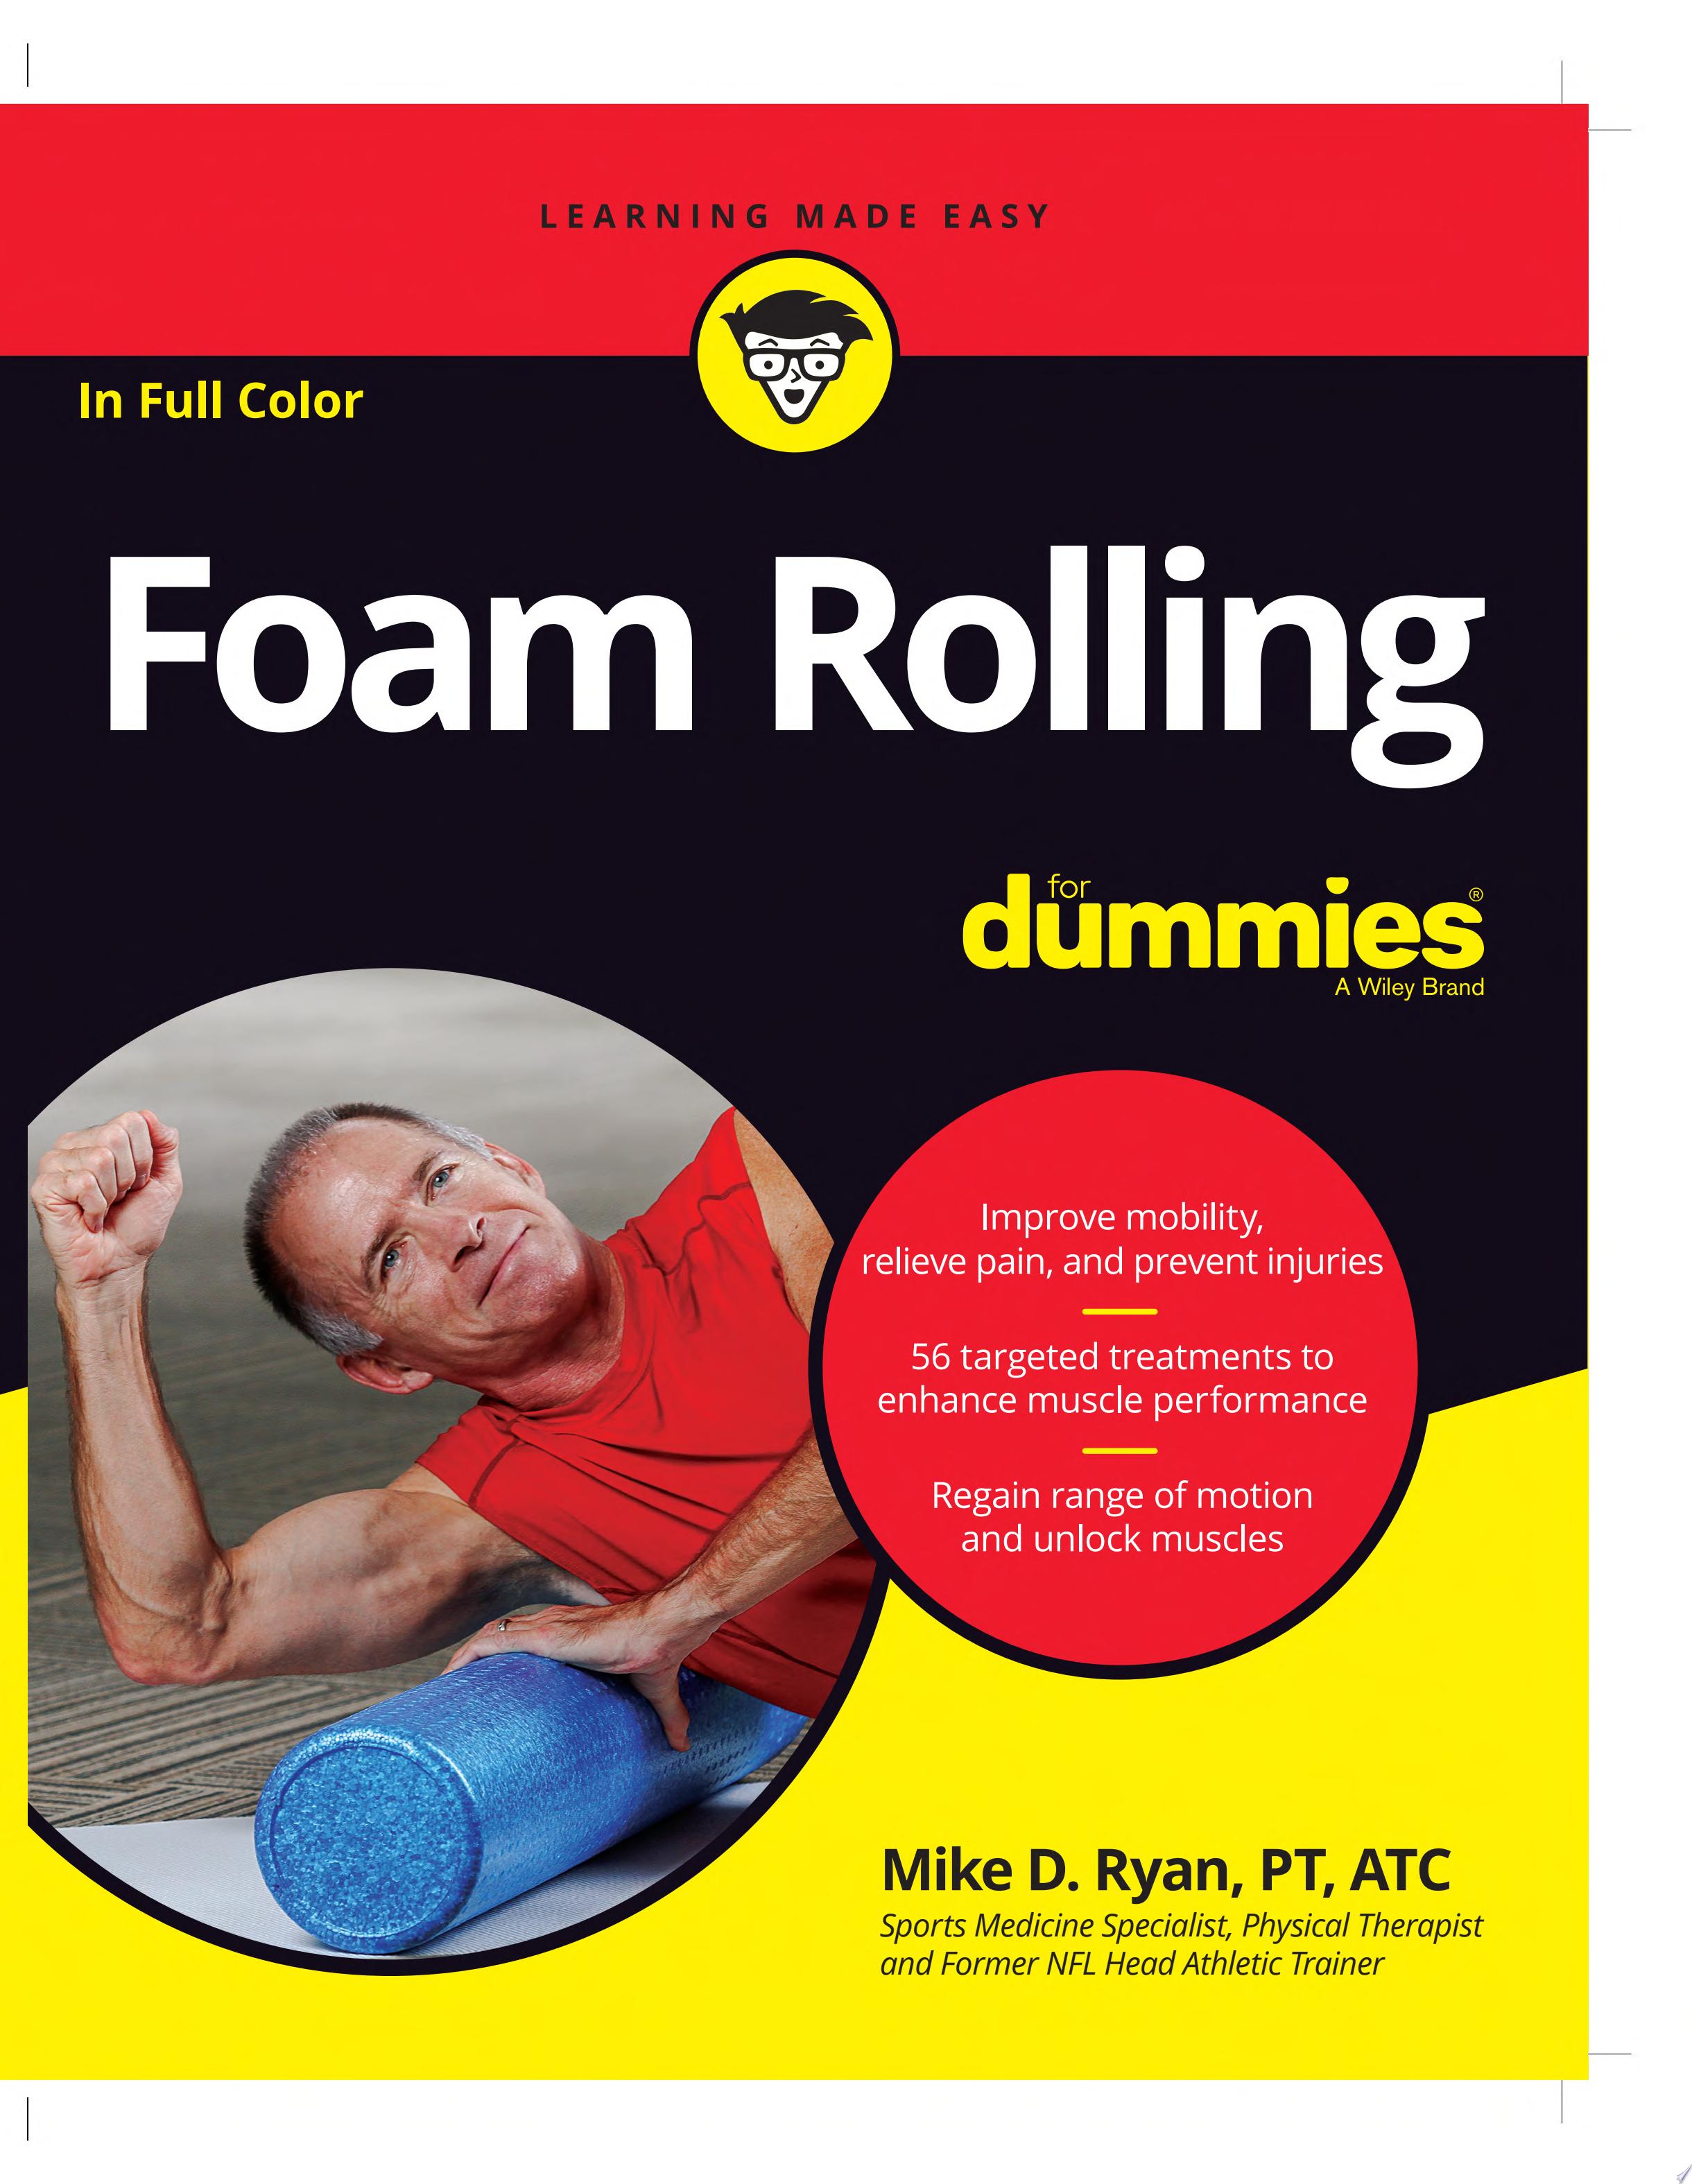 Image for "Foam Rolling For Dummies"